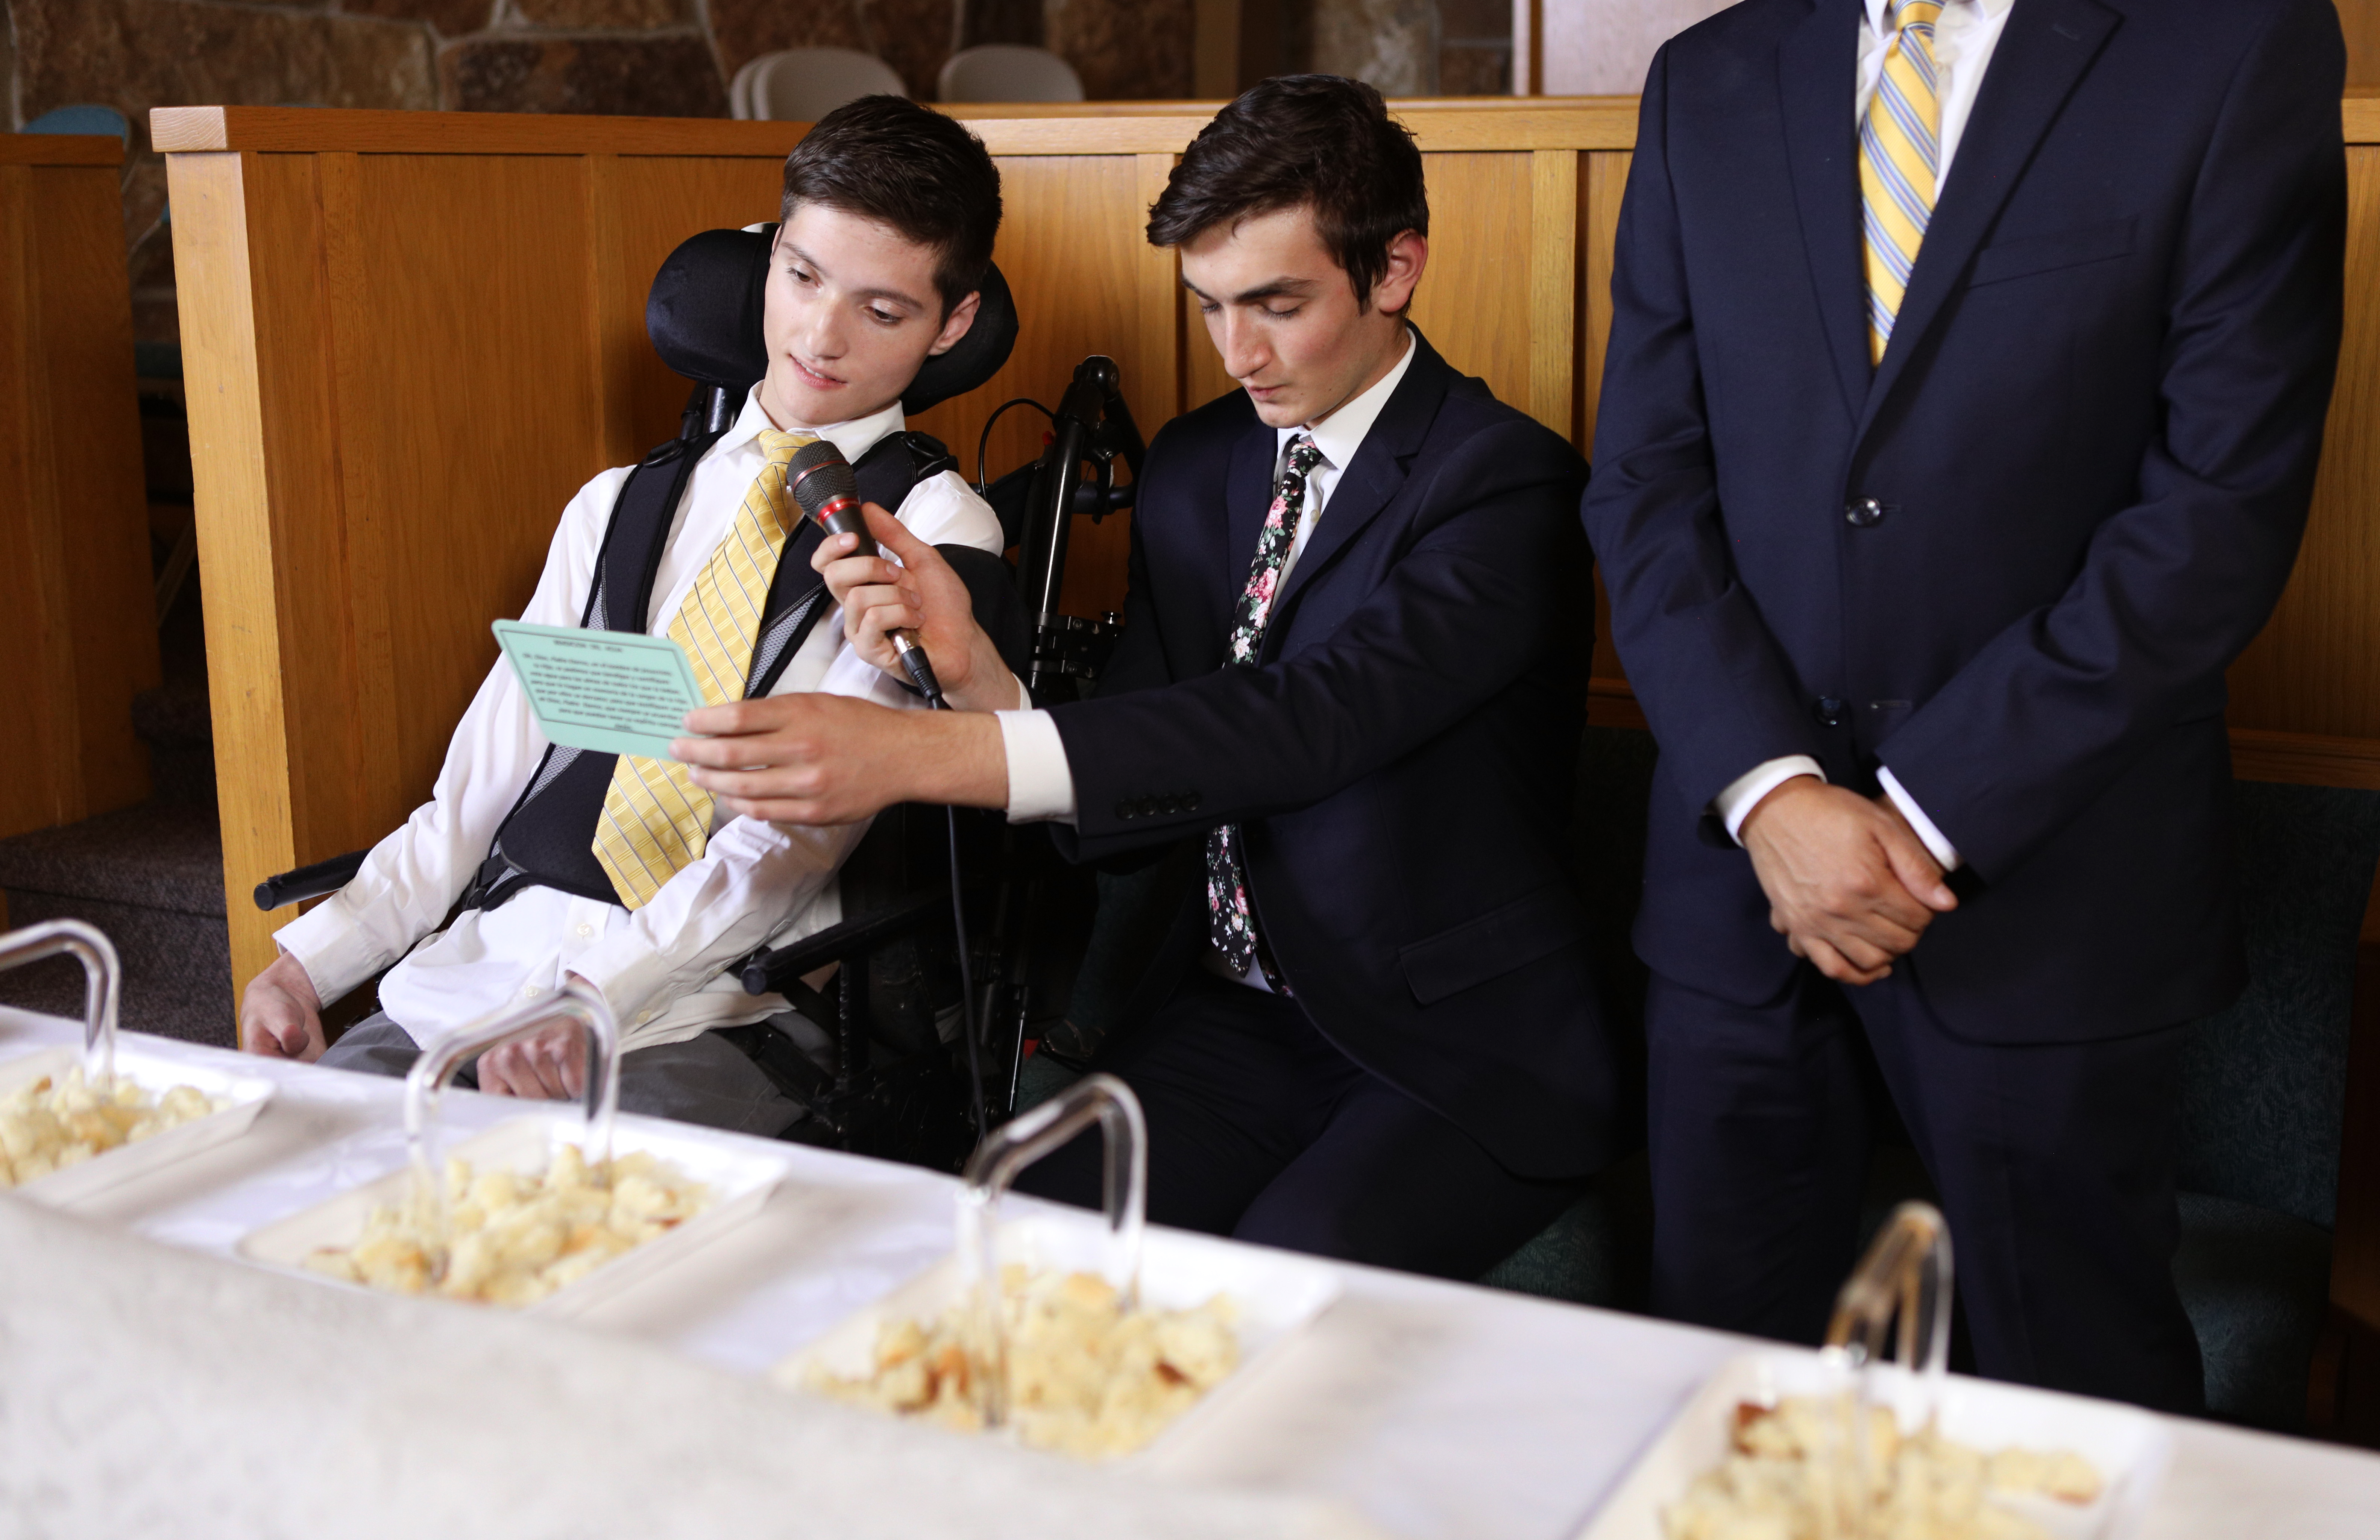 A young man who is in a wheelchair has a friend next to him holding the sacrament prayer and microphone so he may bless the sacrament.